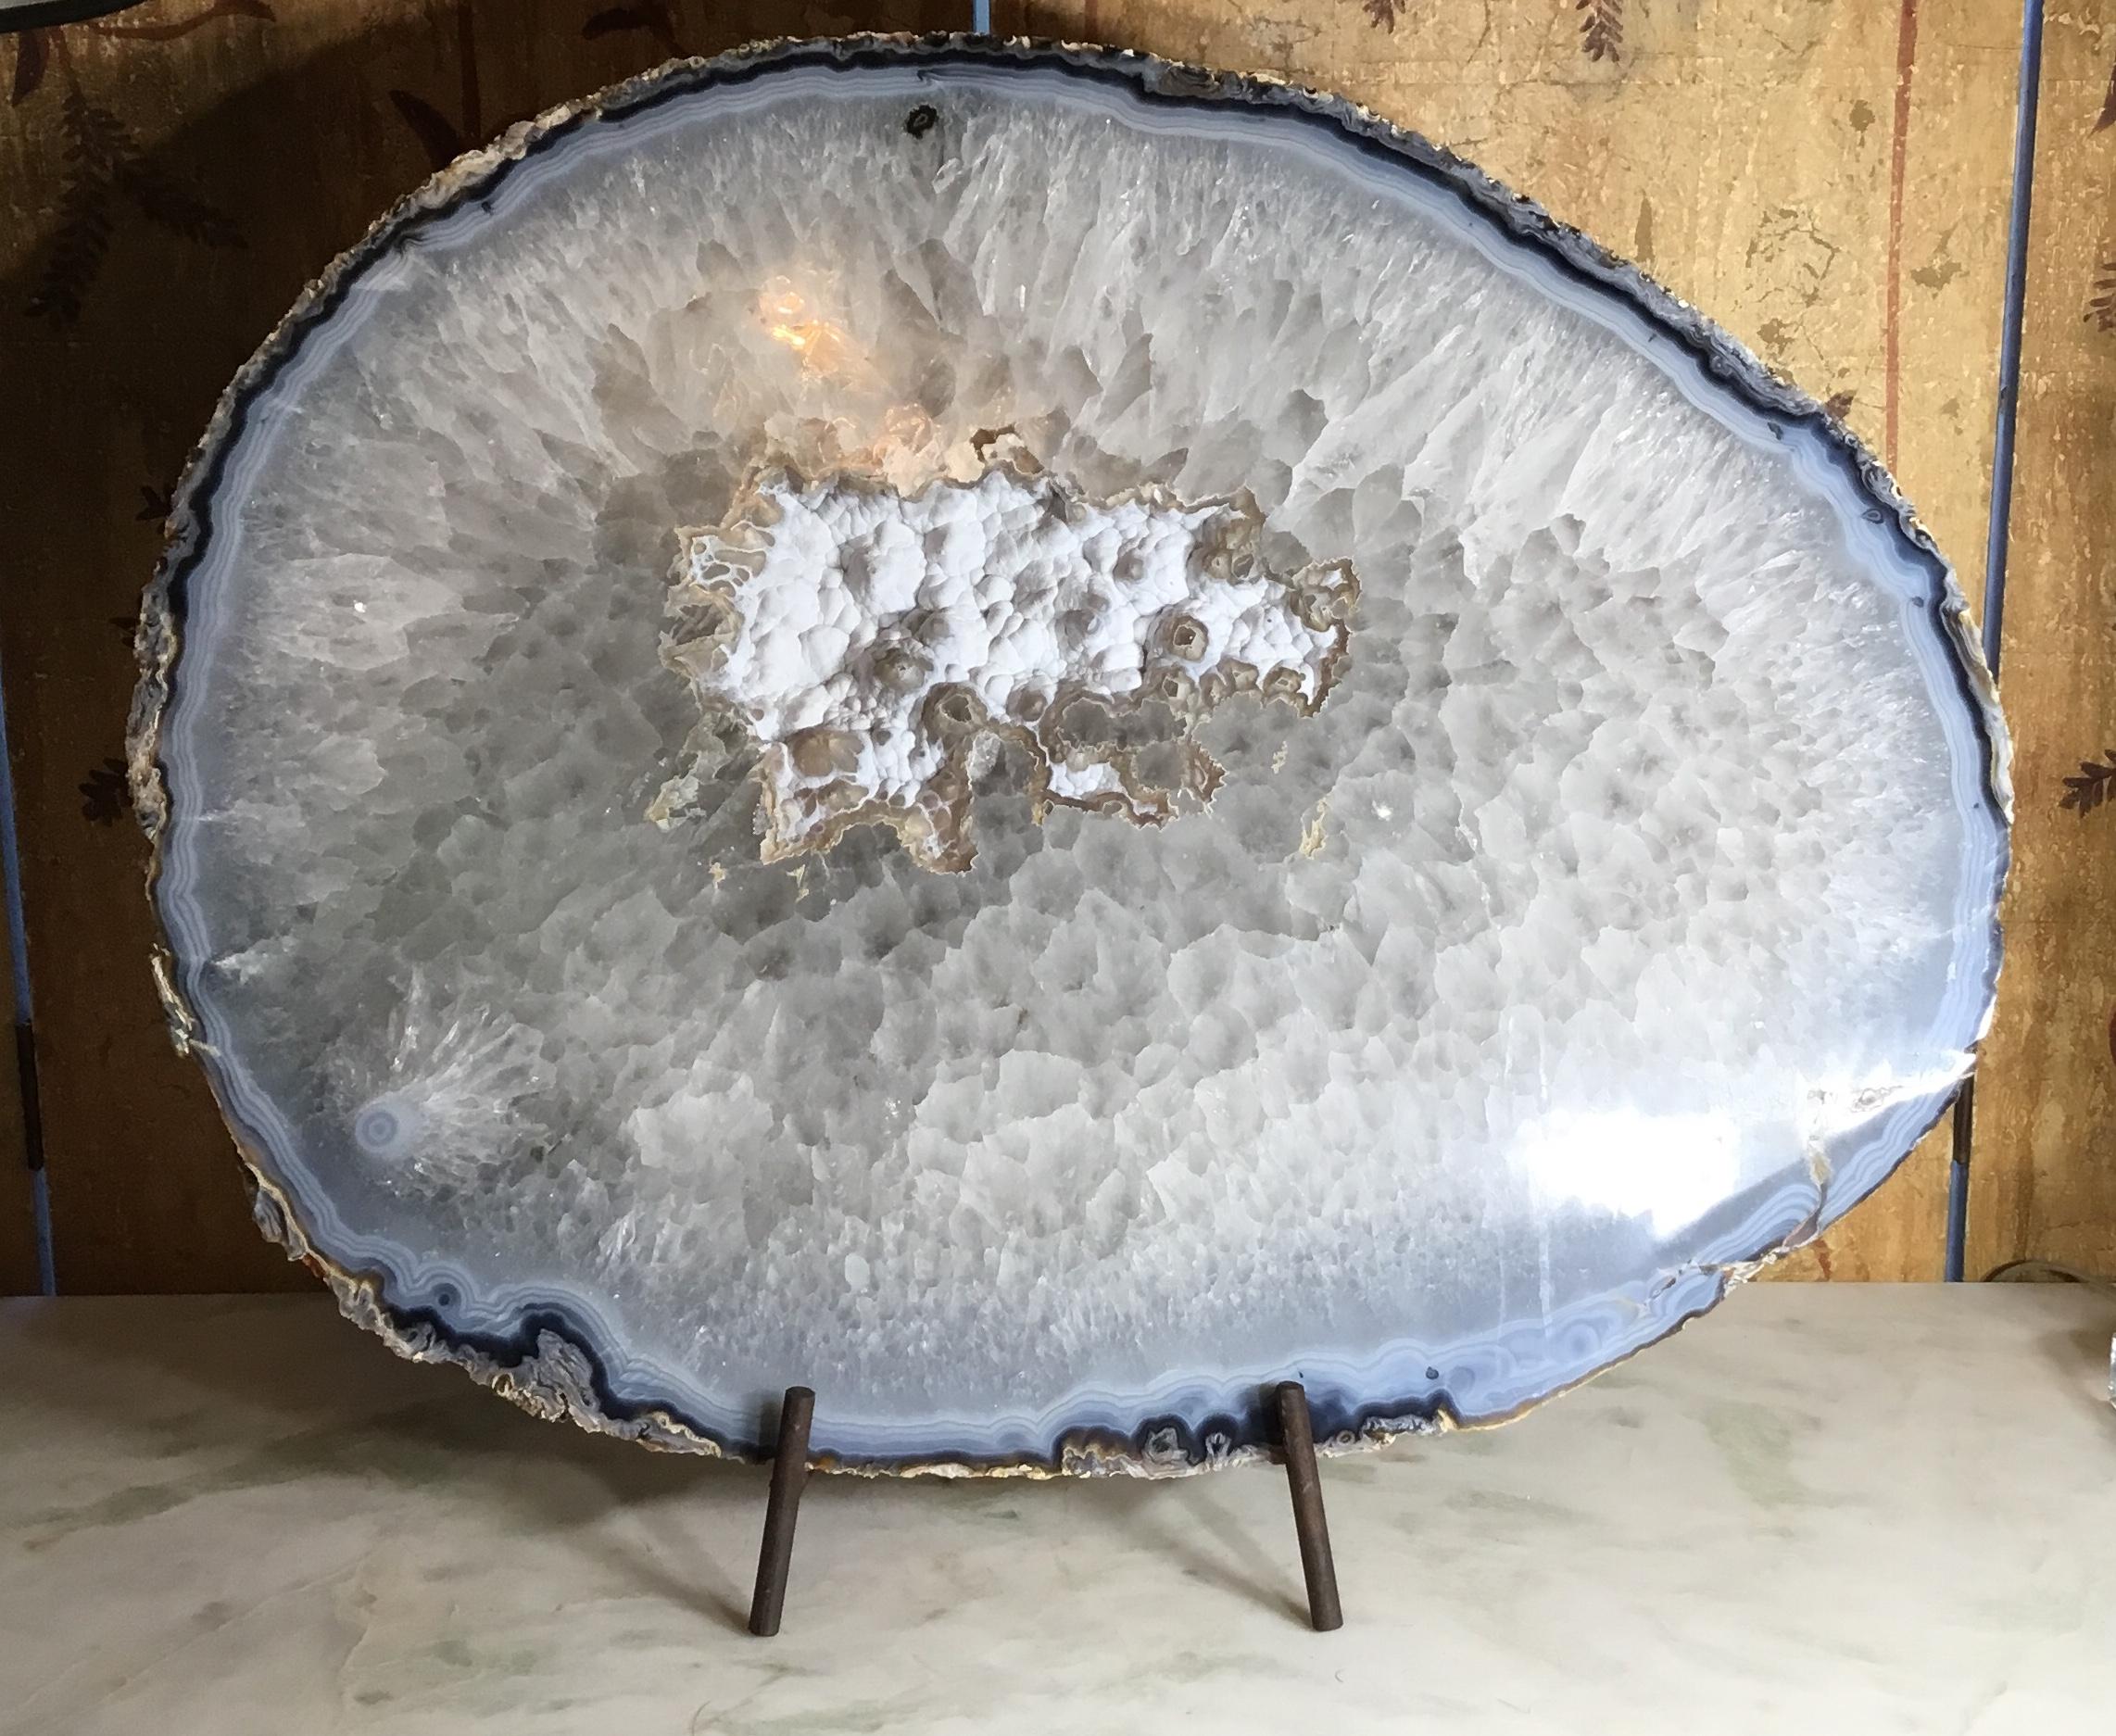 Fantastic large crystal quartz agate cut and polish to make one of a kind beautiful object of art for display ,off white ,gray-light blue color 
Make it perfect for room decoration.
Mounted on custom made steel display piece, which is included.